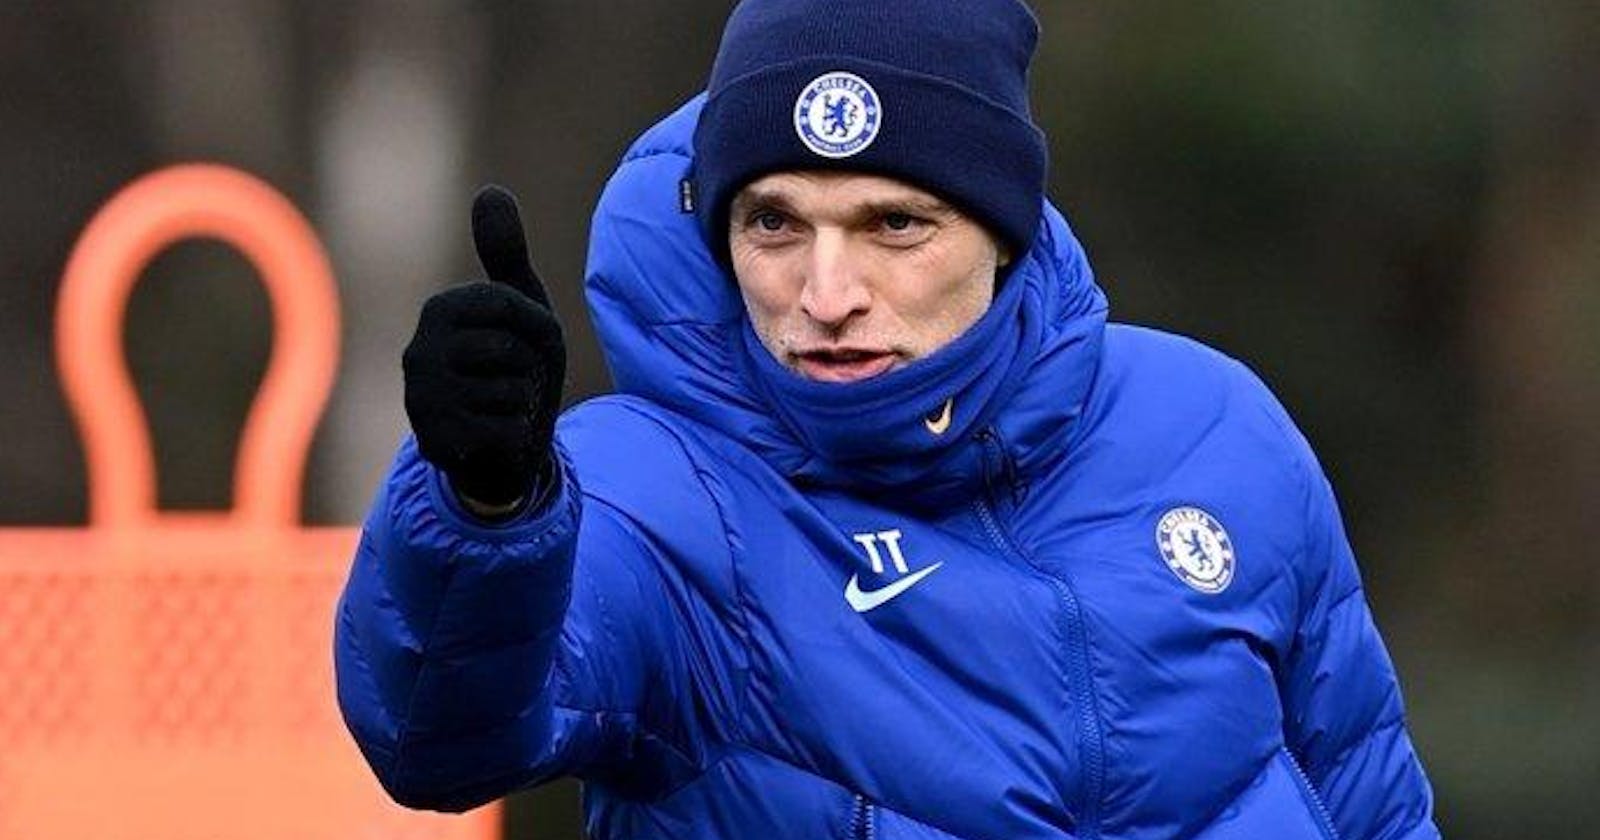 CHELSEA boss Thomas Tuchel has been slammed for his comments